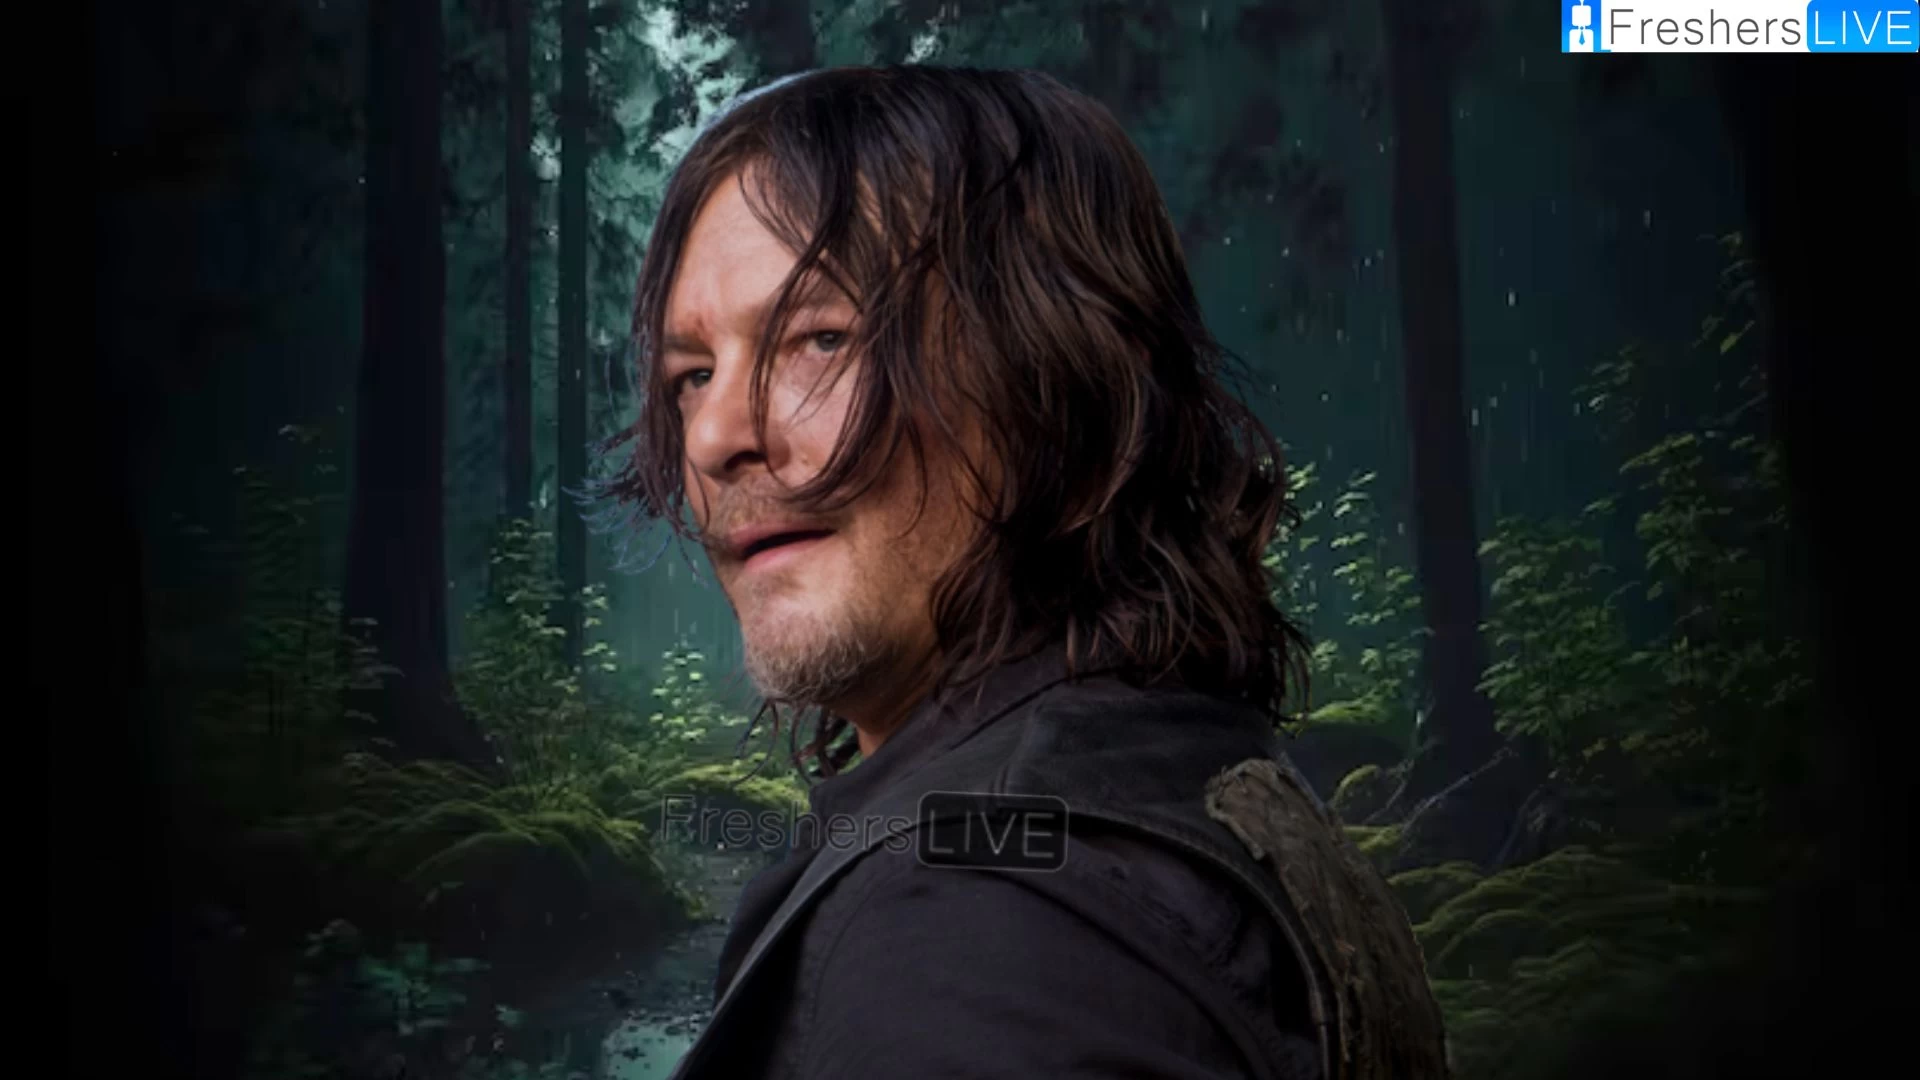 What Happened to Daryl in the Walking Dead? Does Daryl Dixon Die in the Walking Dead?